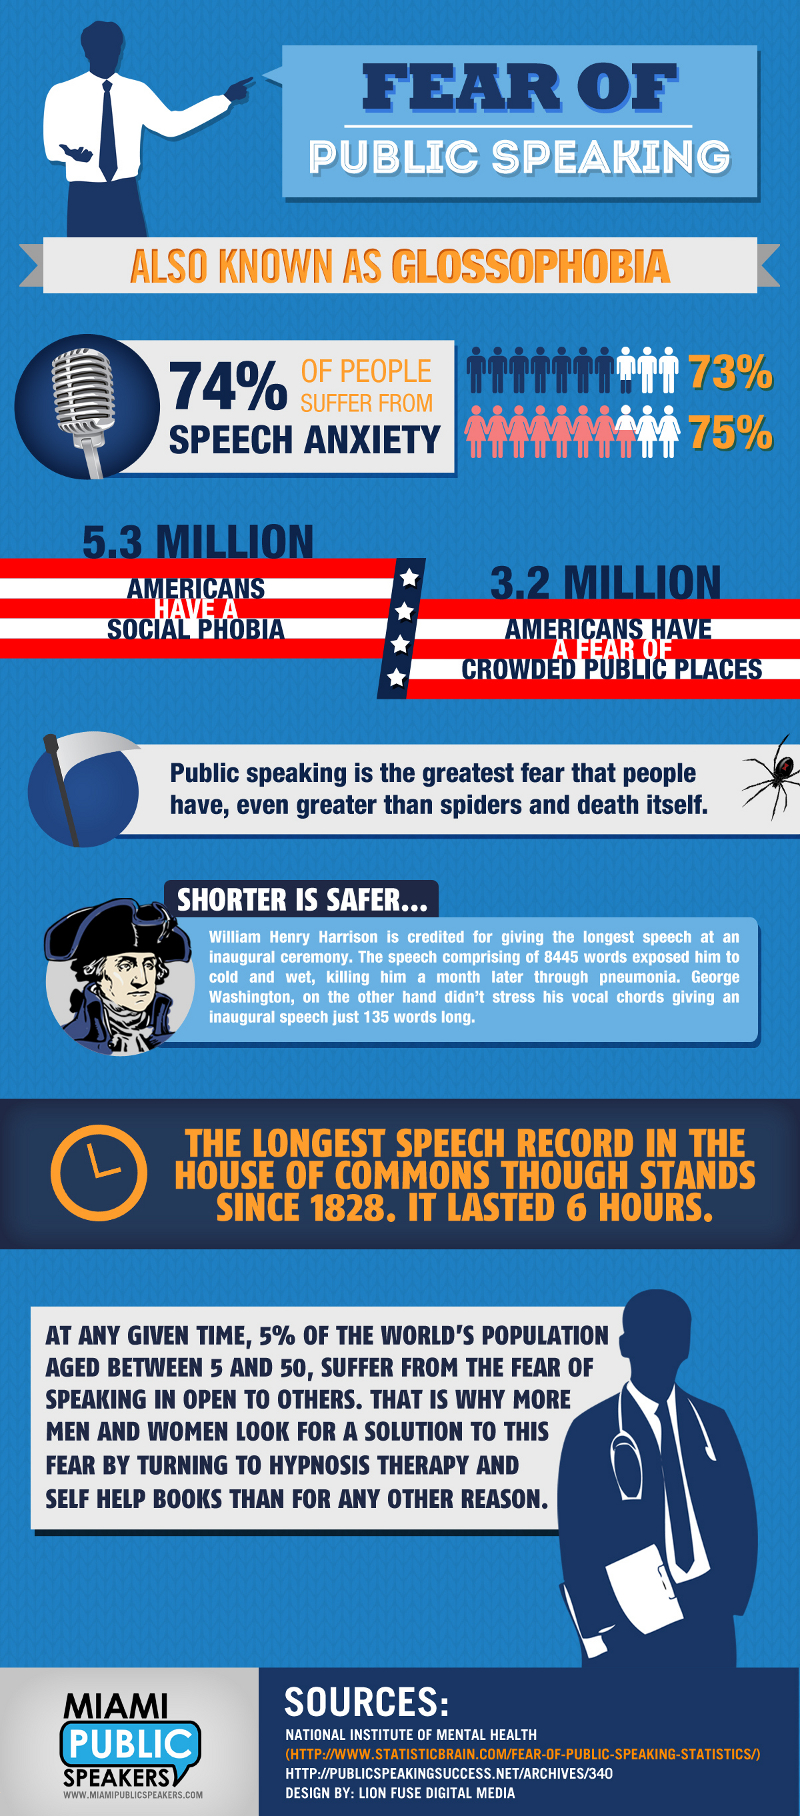 Glossophobia Statistics and Fear of Speaking